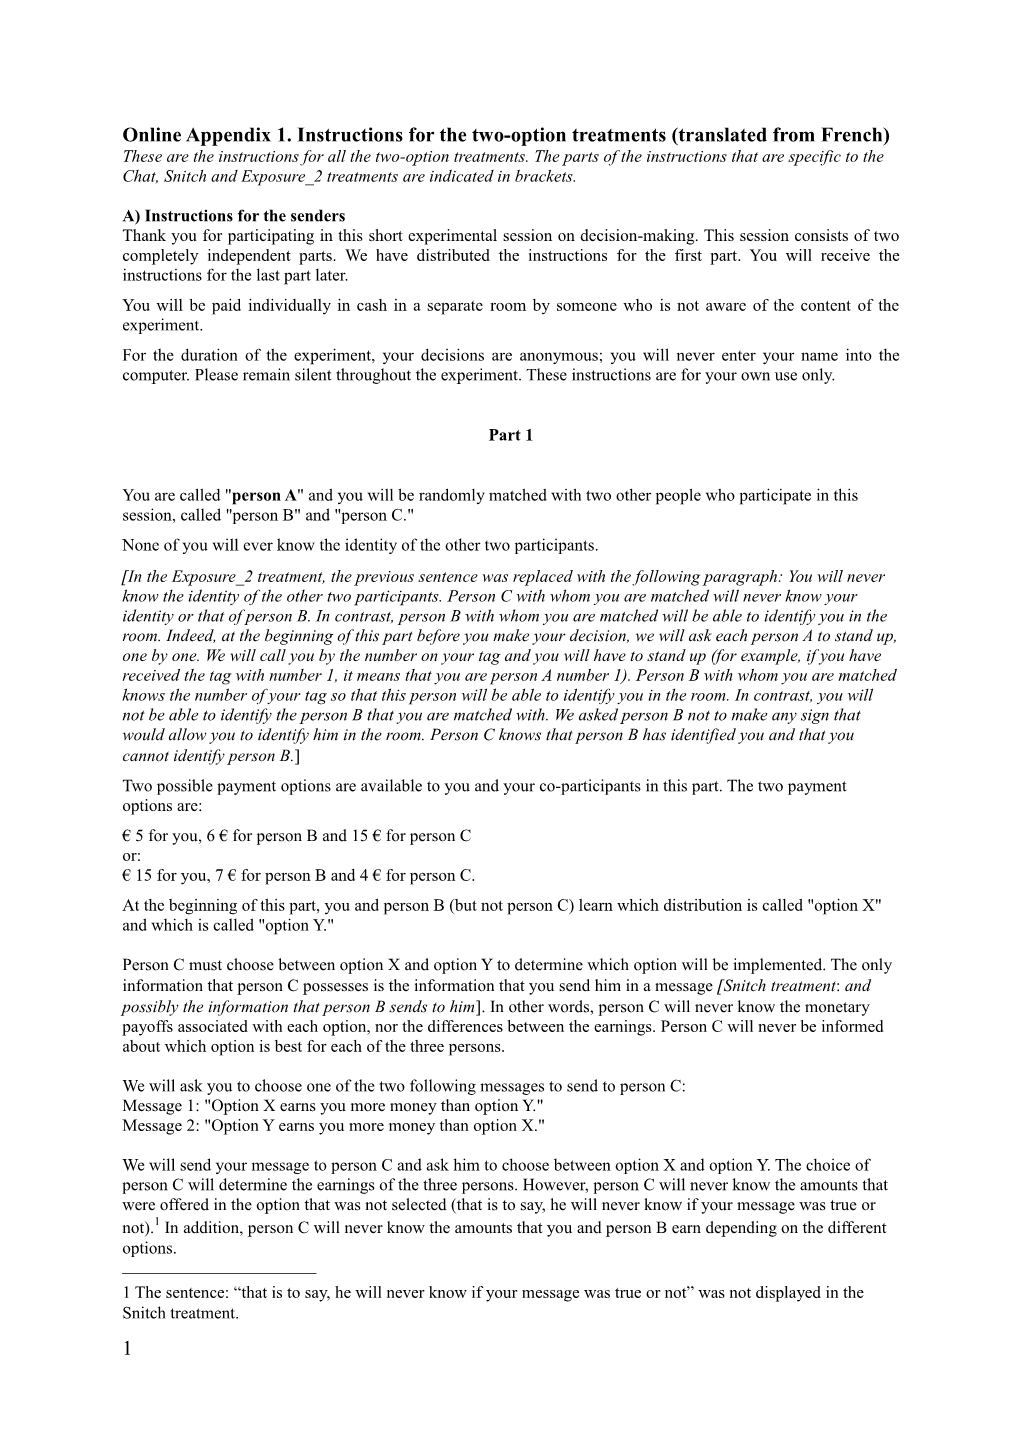 Online Appendix 1. Instructions for the Two-Option Treatments (Translated from French)